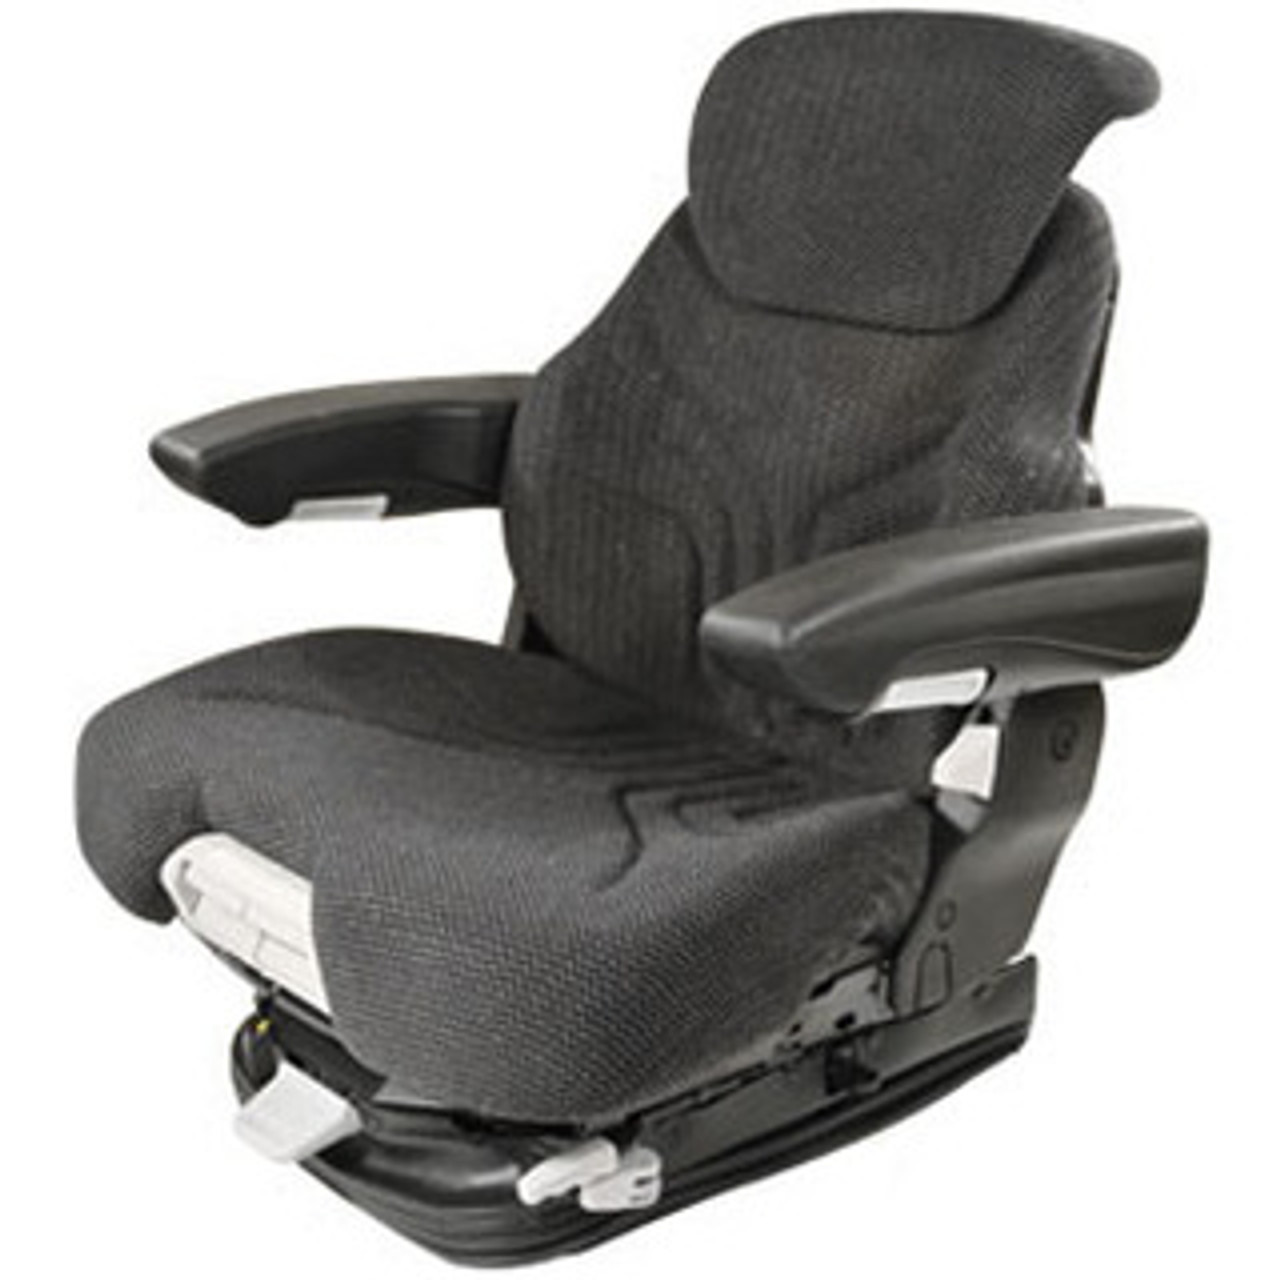 White/Oliver/MPL/Moline Grammer Air Suspension Seat Cloth with Compressor # MSG95GGRC-ASSY